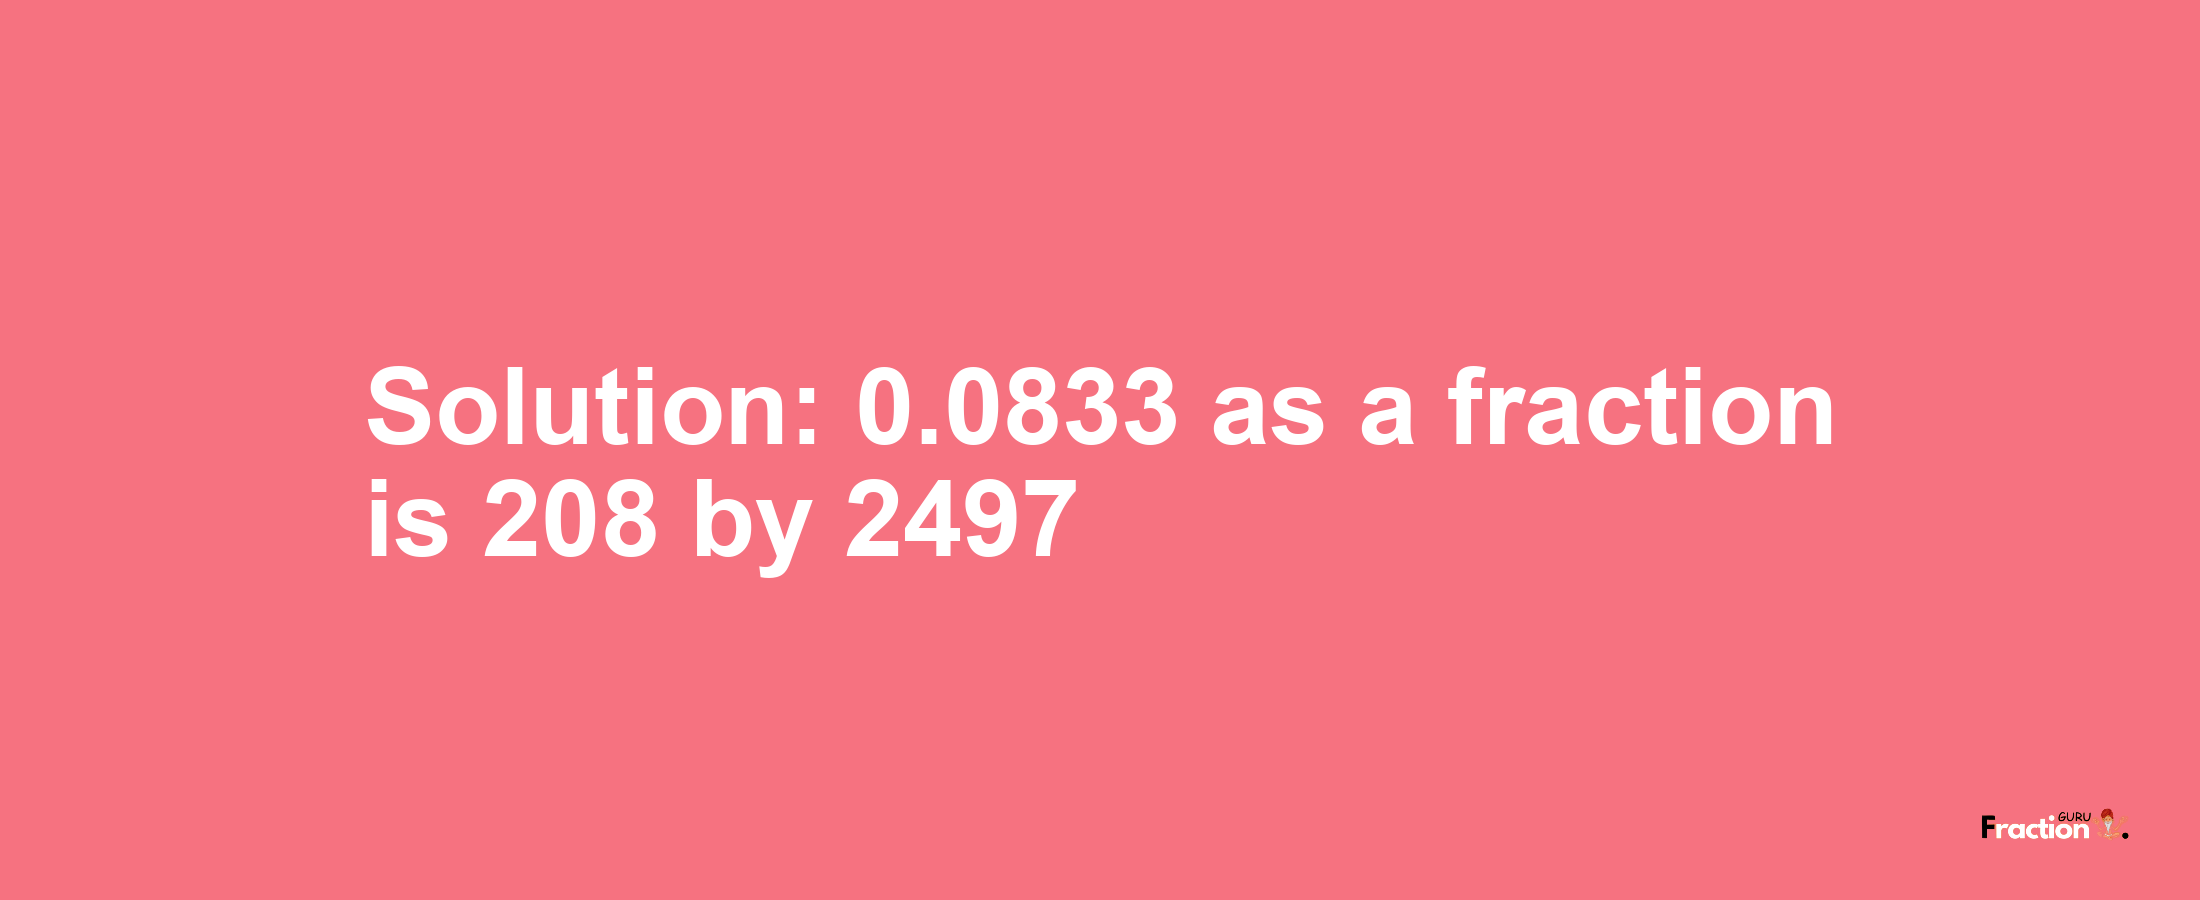 Solution:0.0833 as a fraction is 208/2497